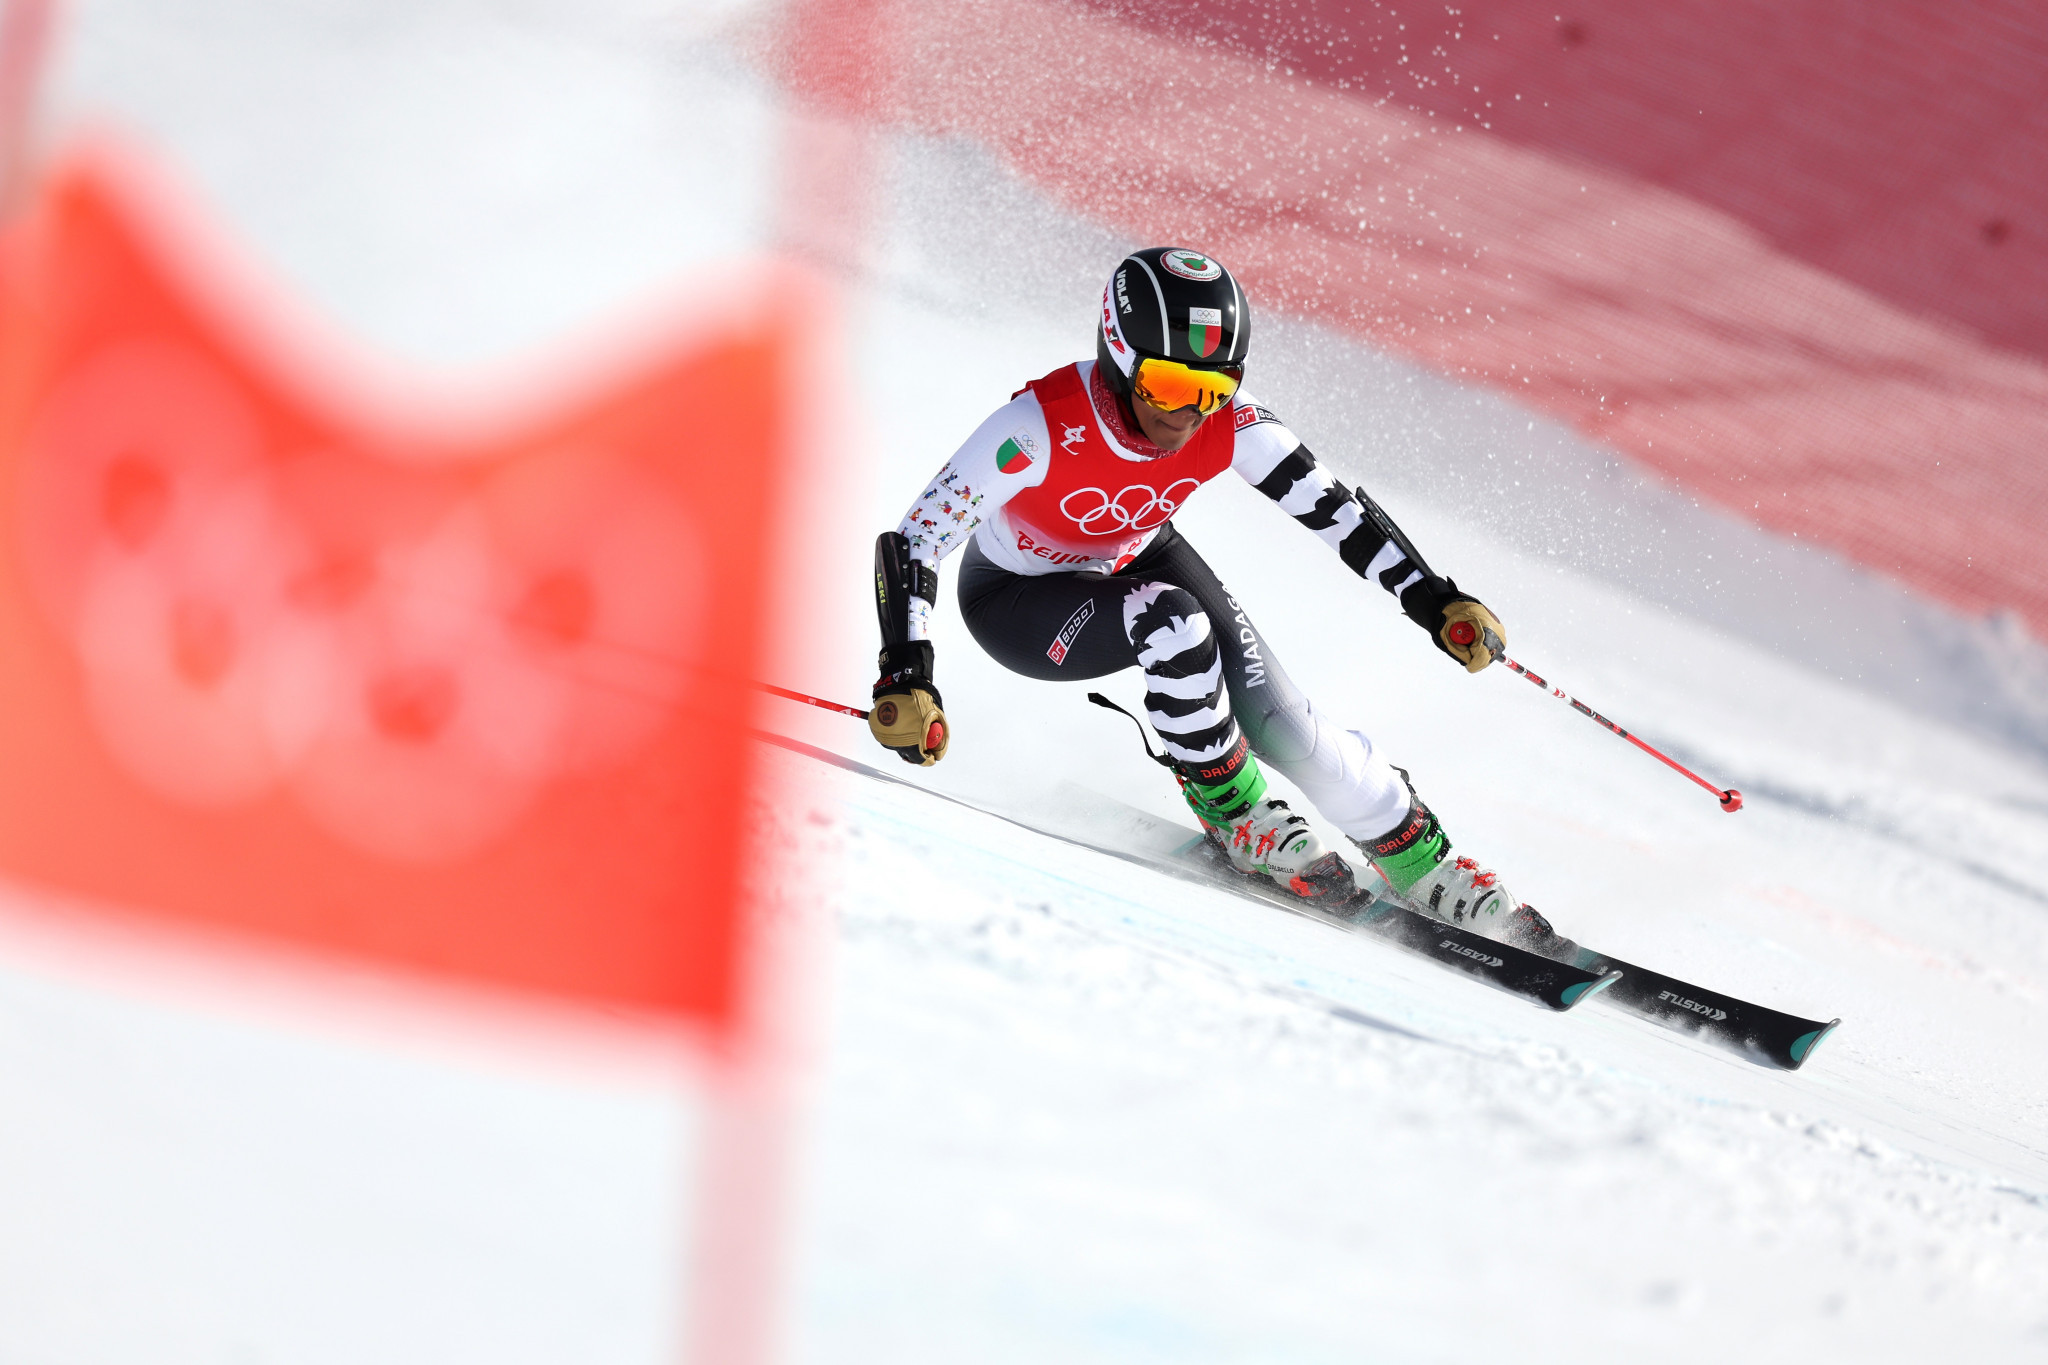 Mialitiana Clerc of Madagascar competed in the women's giant slalom, finishing 41st ©Getty Images